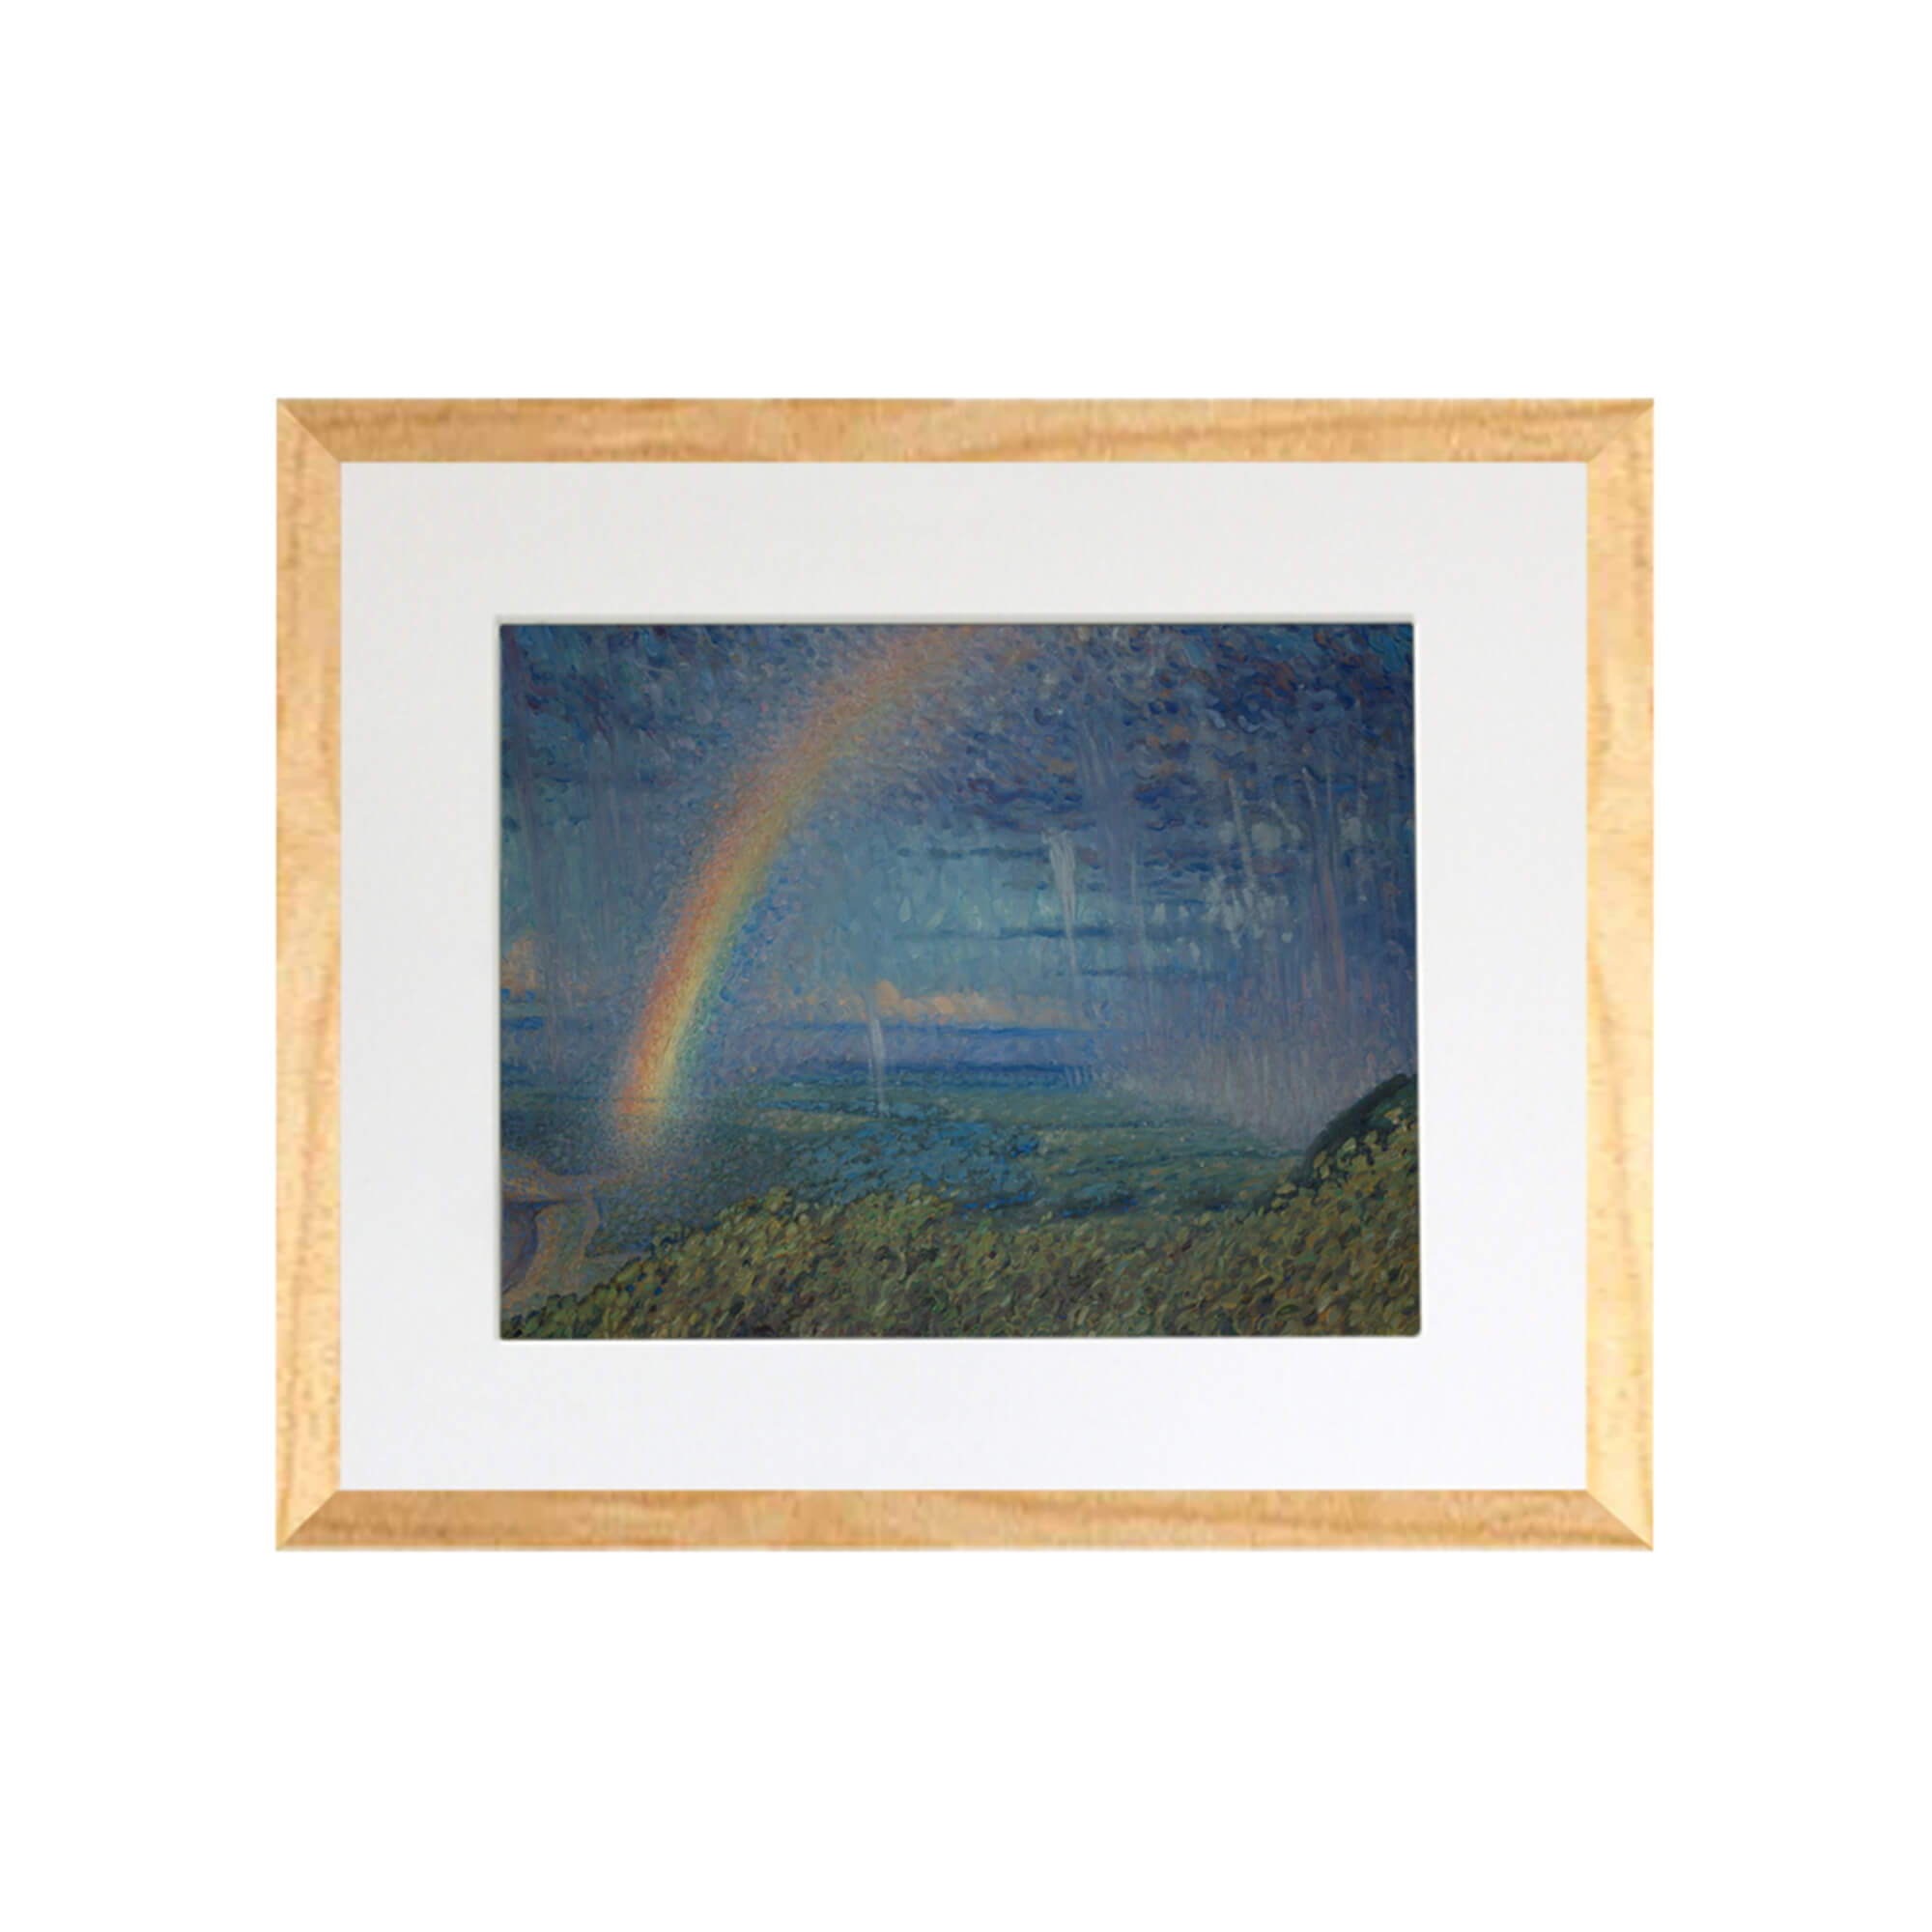 Landscape with a rainbow and drizzling rain